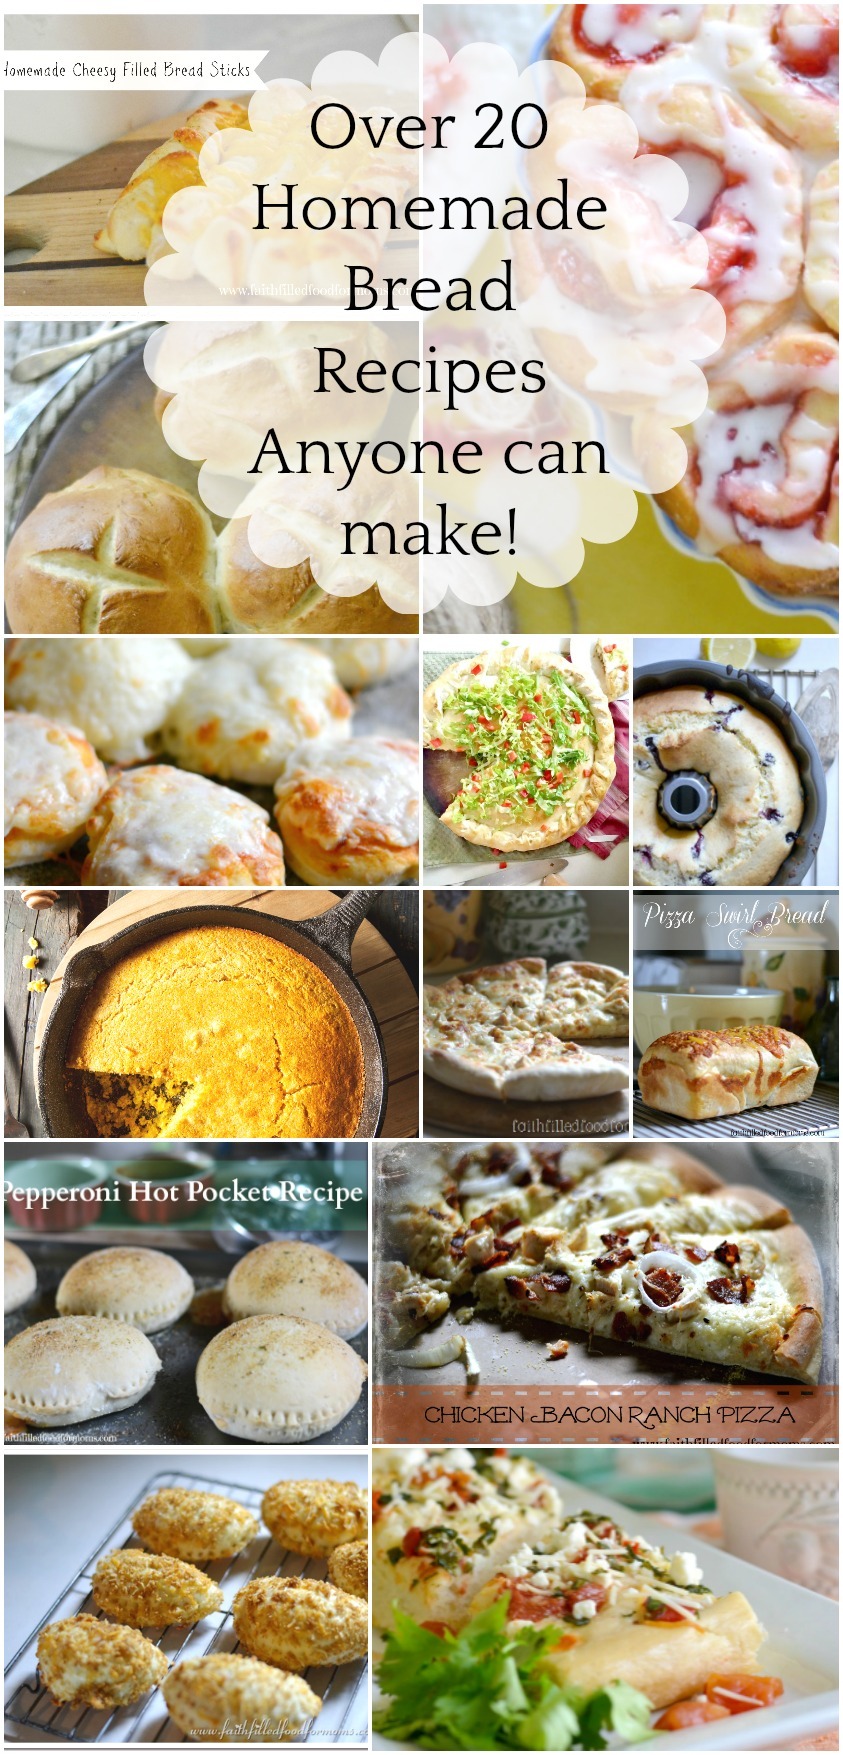 Over 20 Homemade Bread Recipes Anyone Can Make! From savory to sweet these bread recipe ideas are deelish!